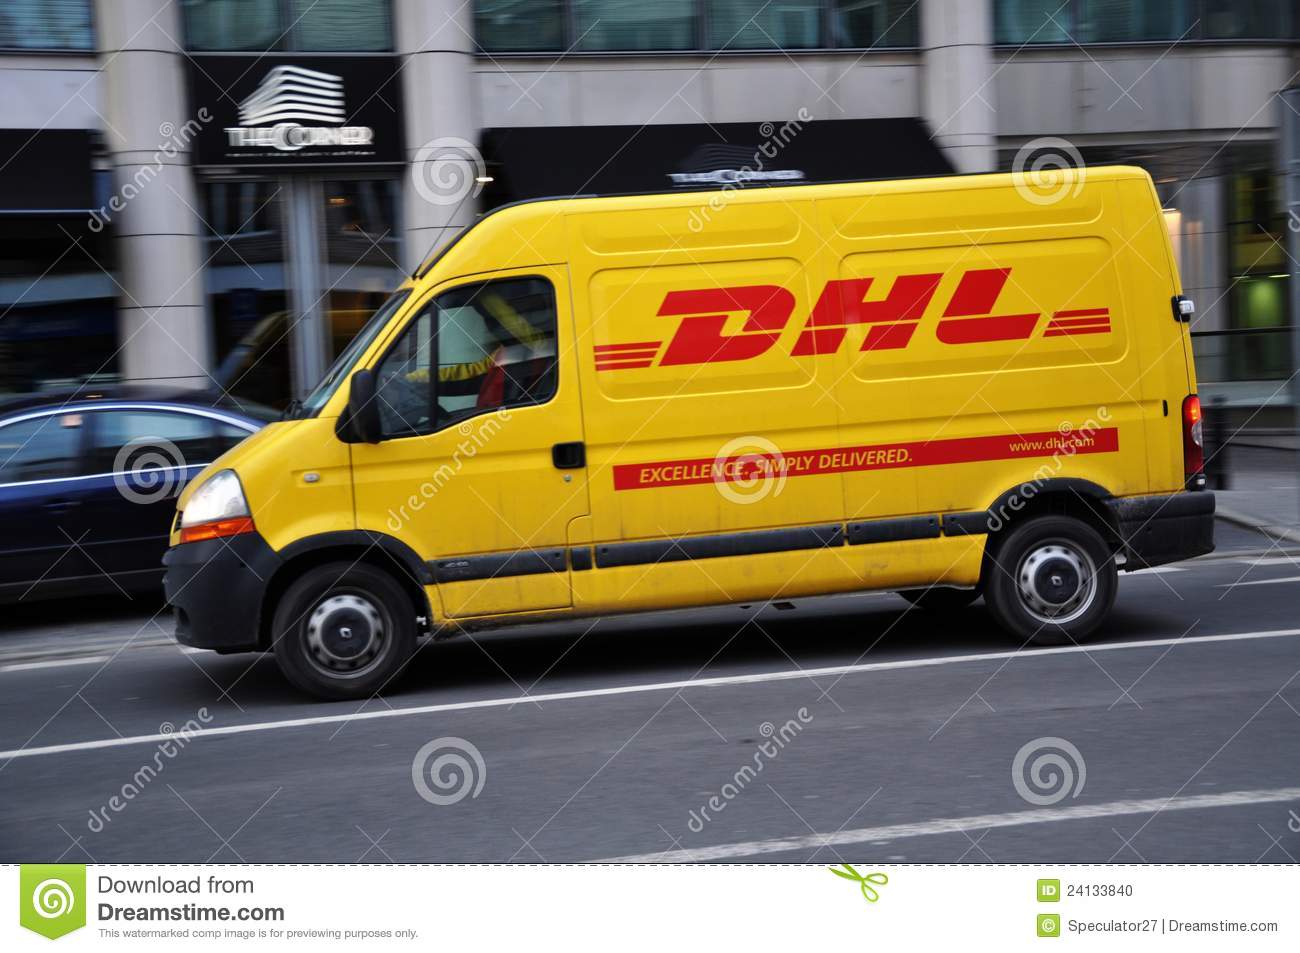 Dhl Stock Photos, Images, & Pictures.